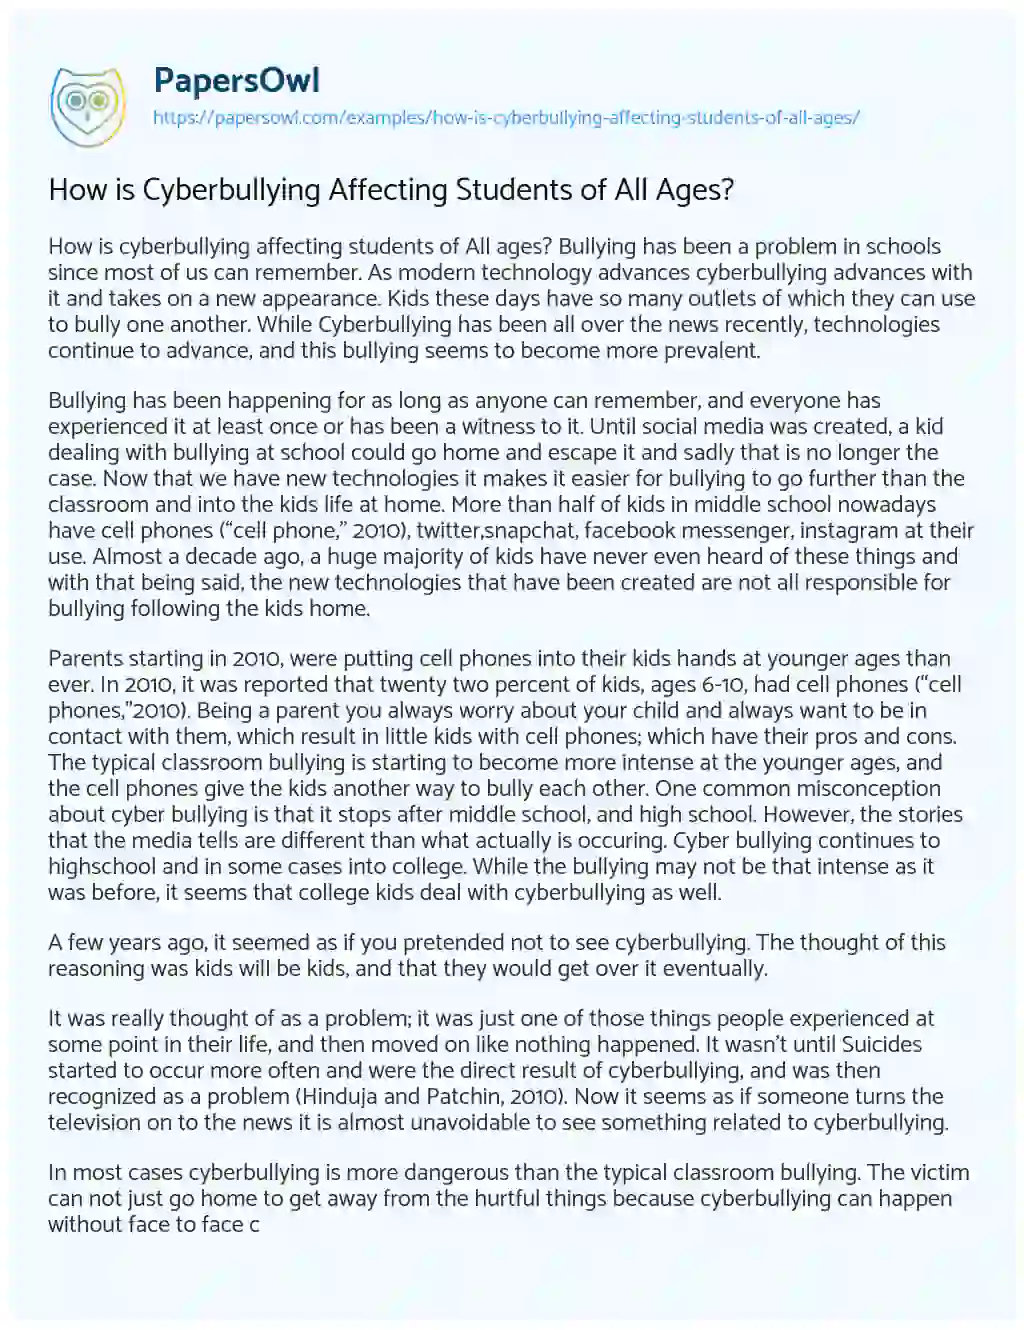 How is Cyberbullying Affecting Students of all Ages? essay